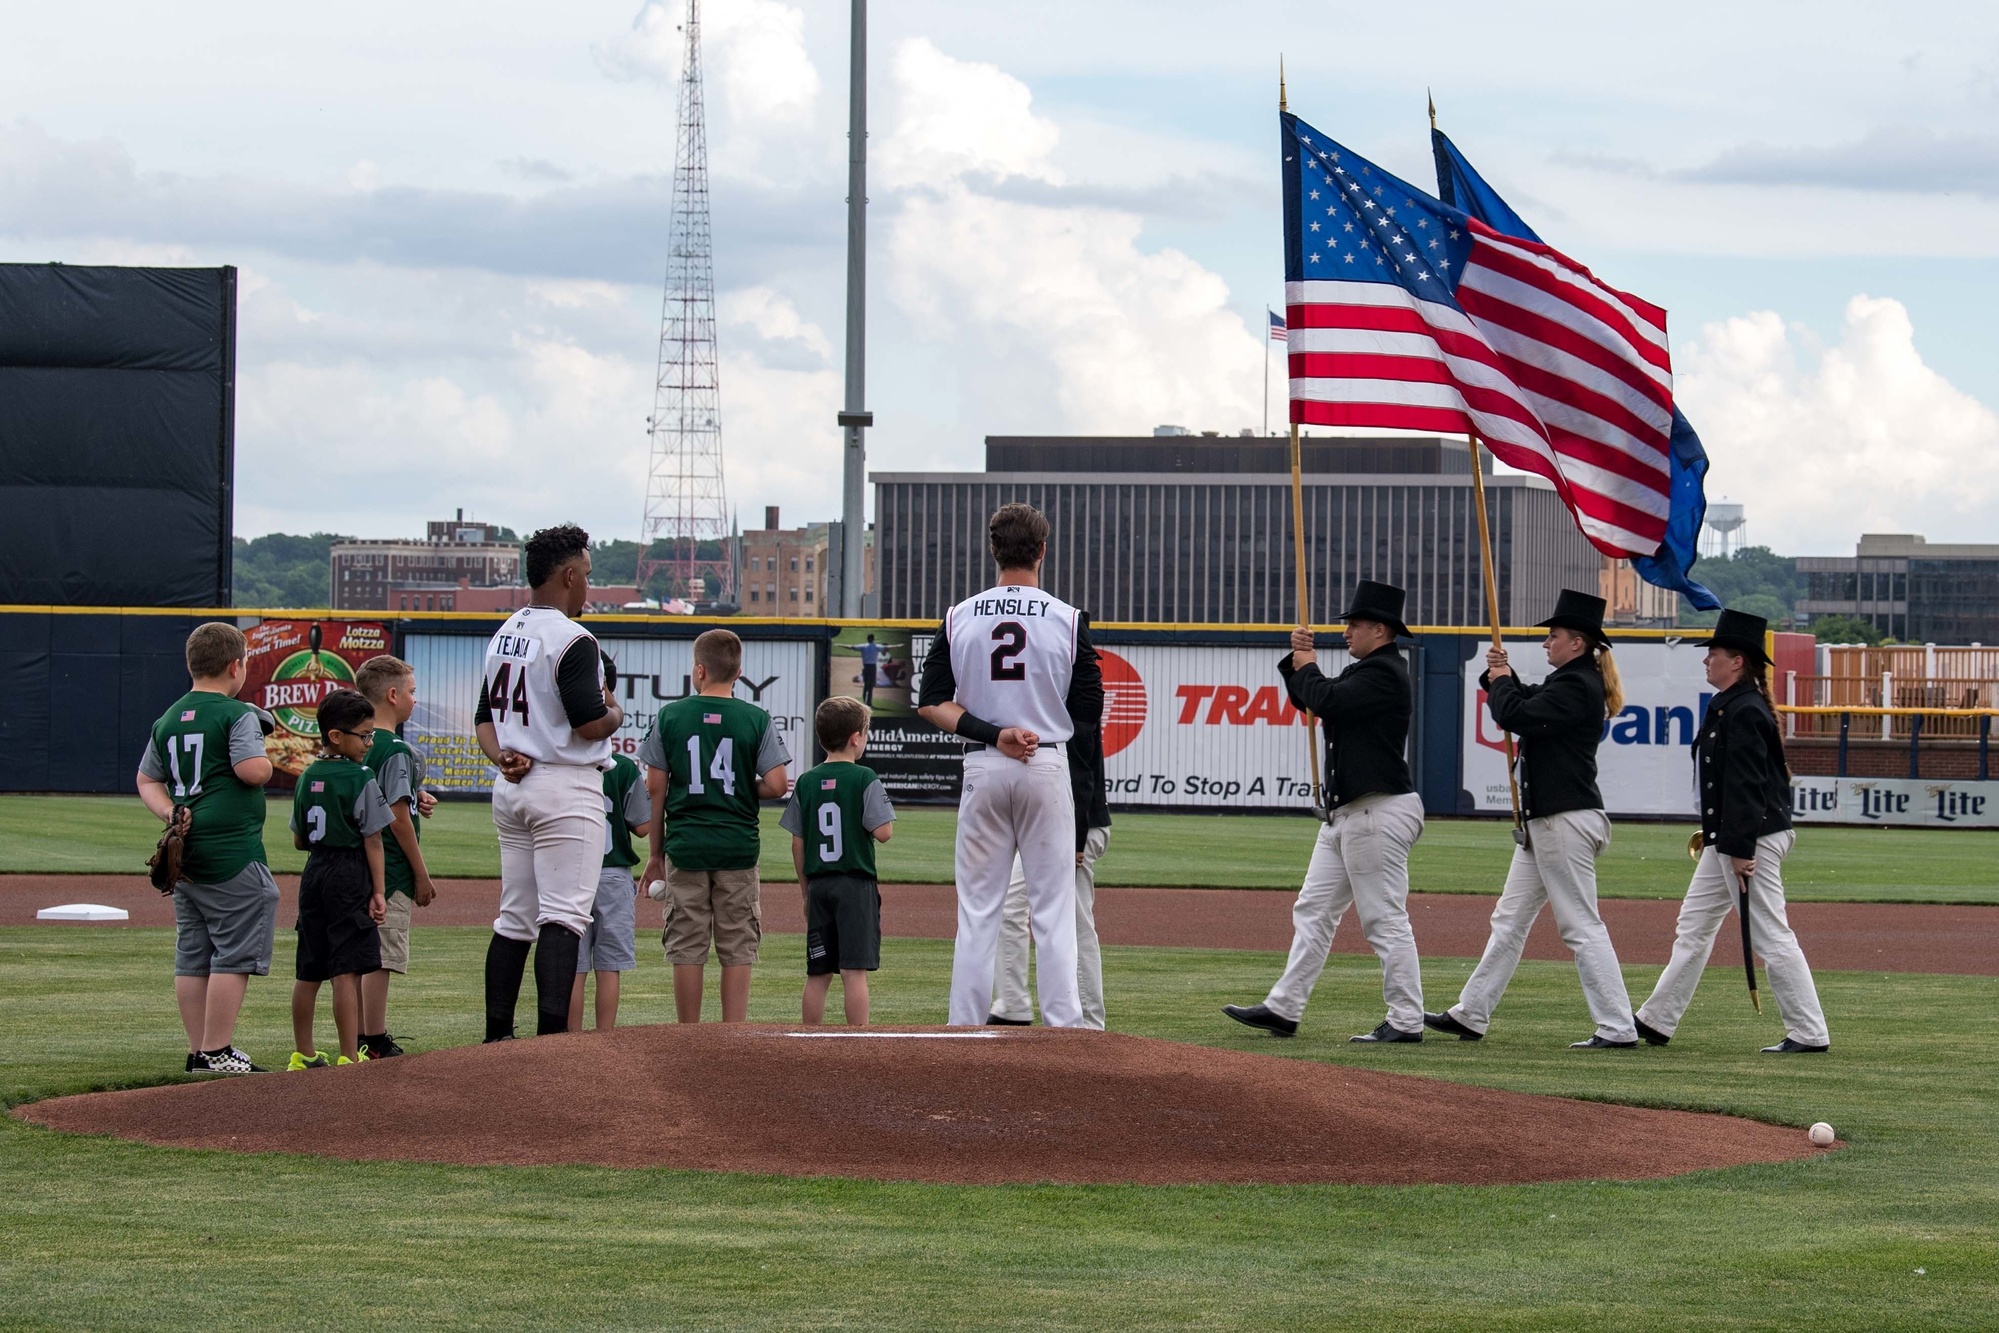 DVIDS - Images - USS Constitution Sailors Parade the Colors at River Bandits  Game [Image 9 of 12]